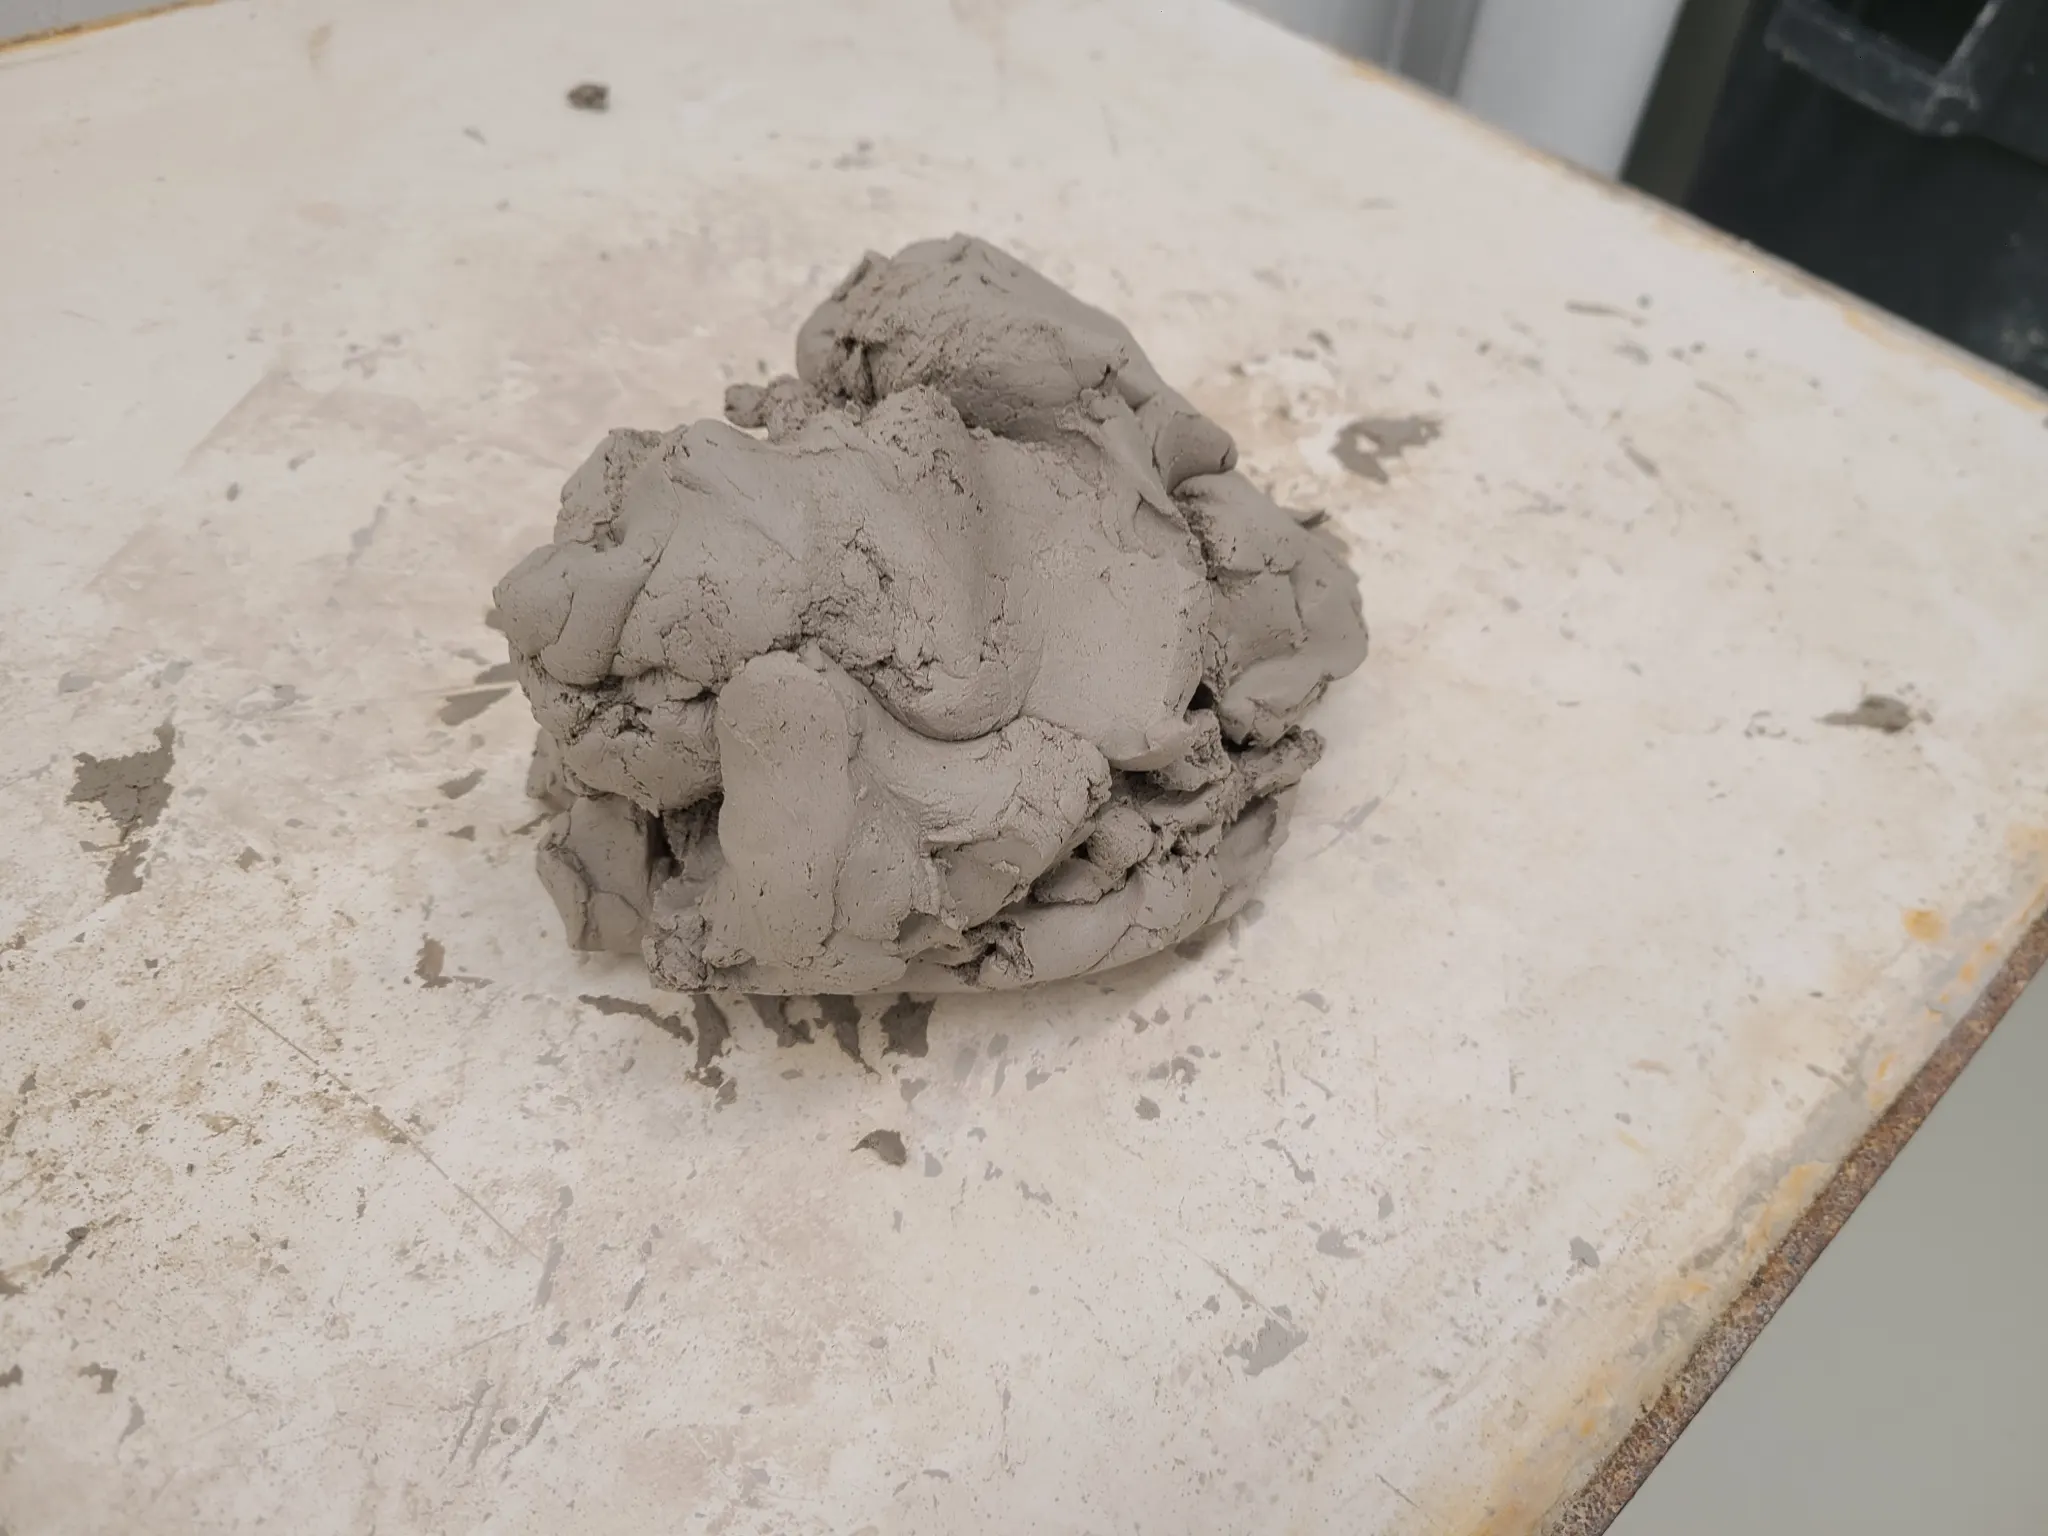 A ball of clay.